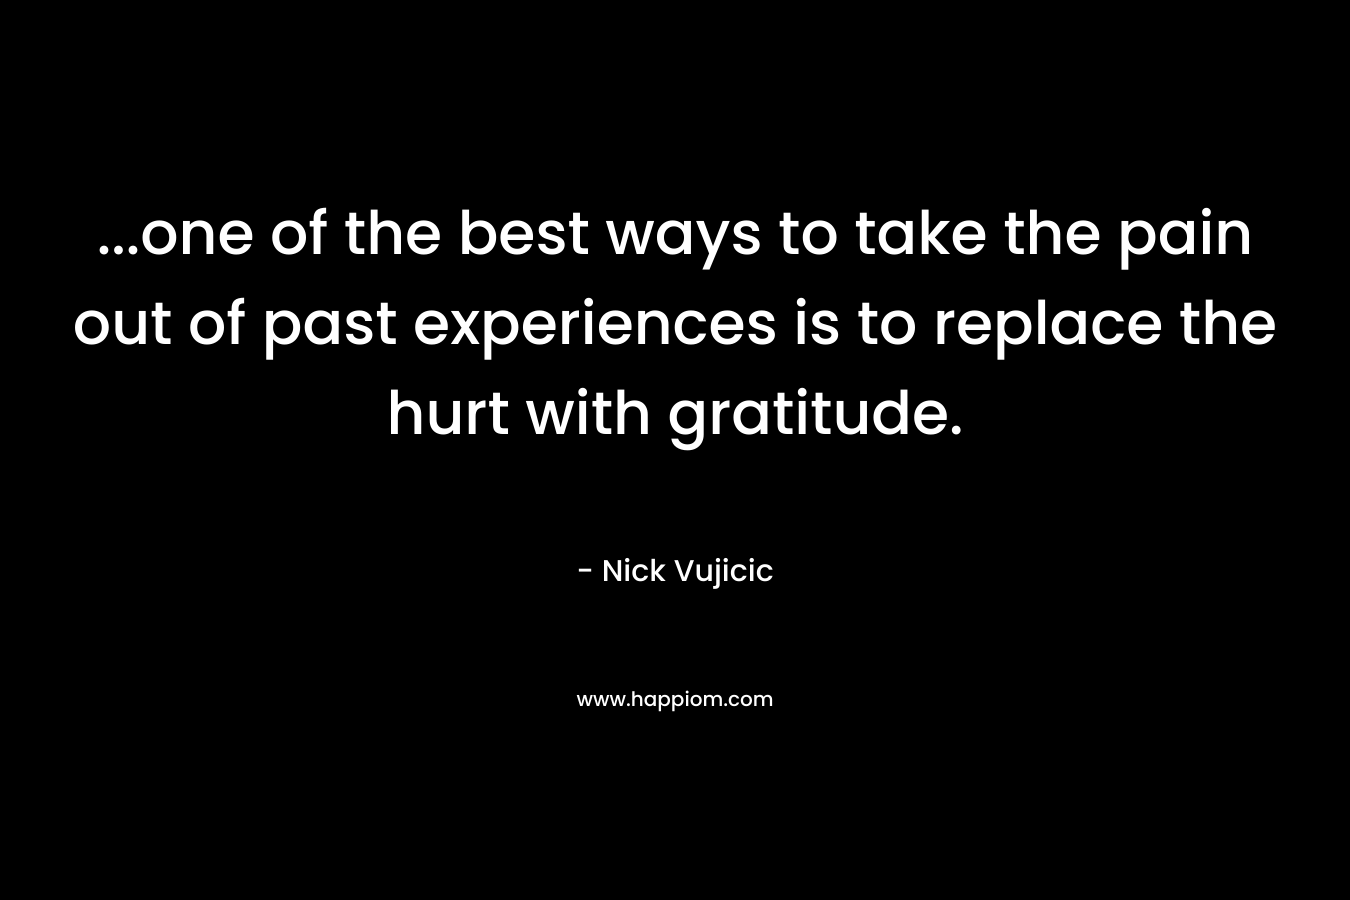 …one of the best ways to take the pain out of past experiences is to replace the hurt with gratitude. – Nick Vujicic